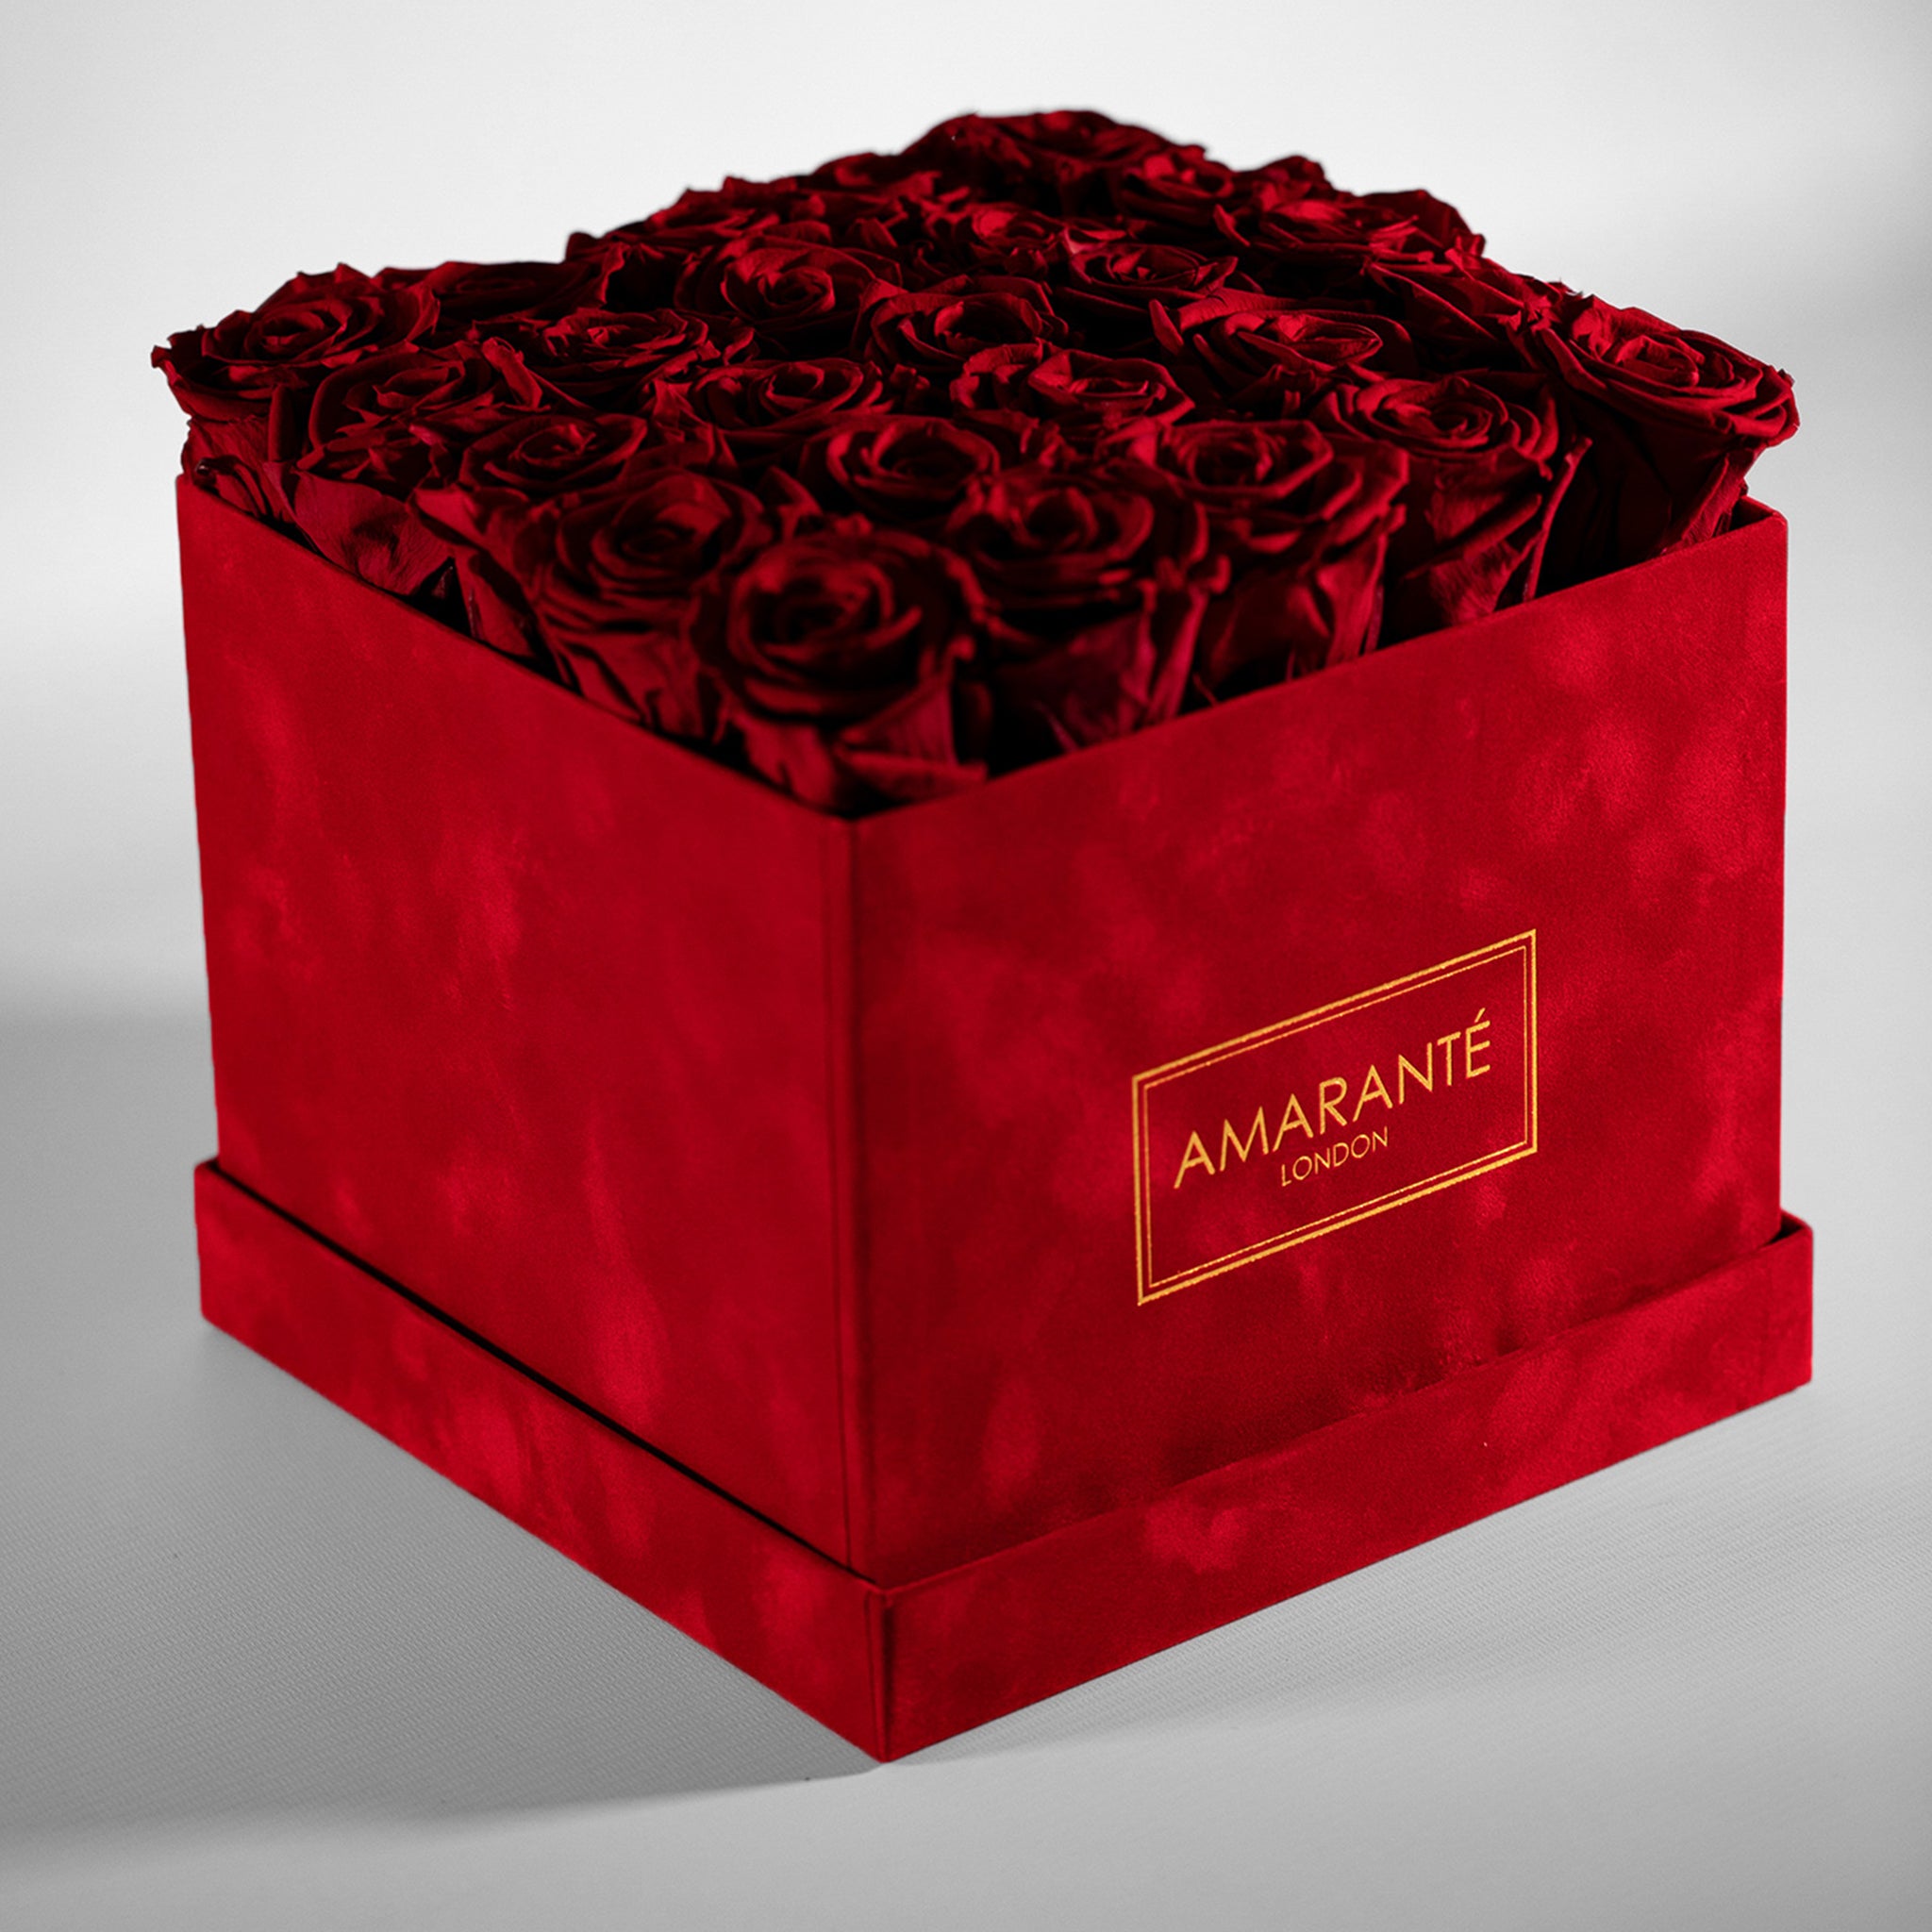 Gorgeous red Roses photographed in a divine red large square box 